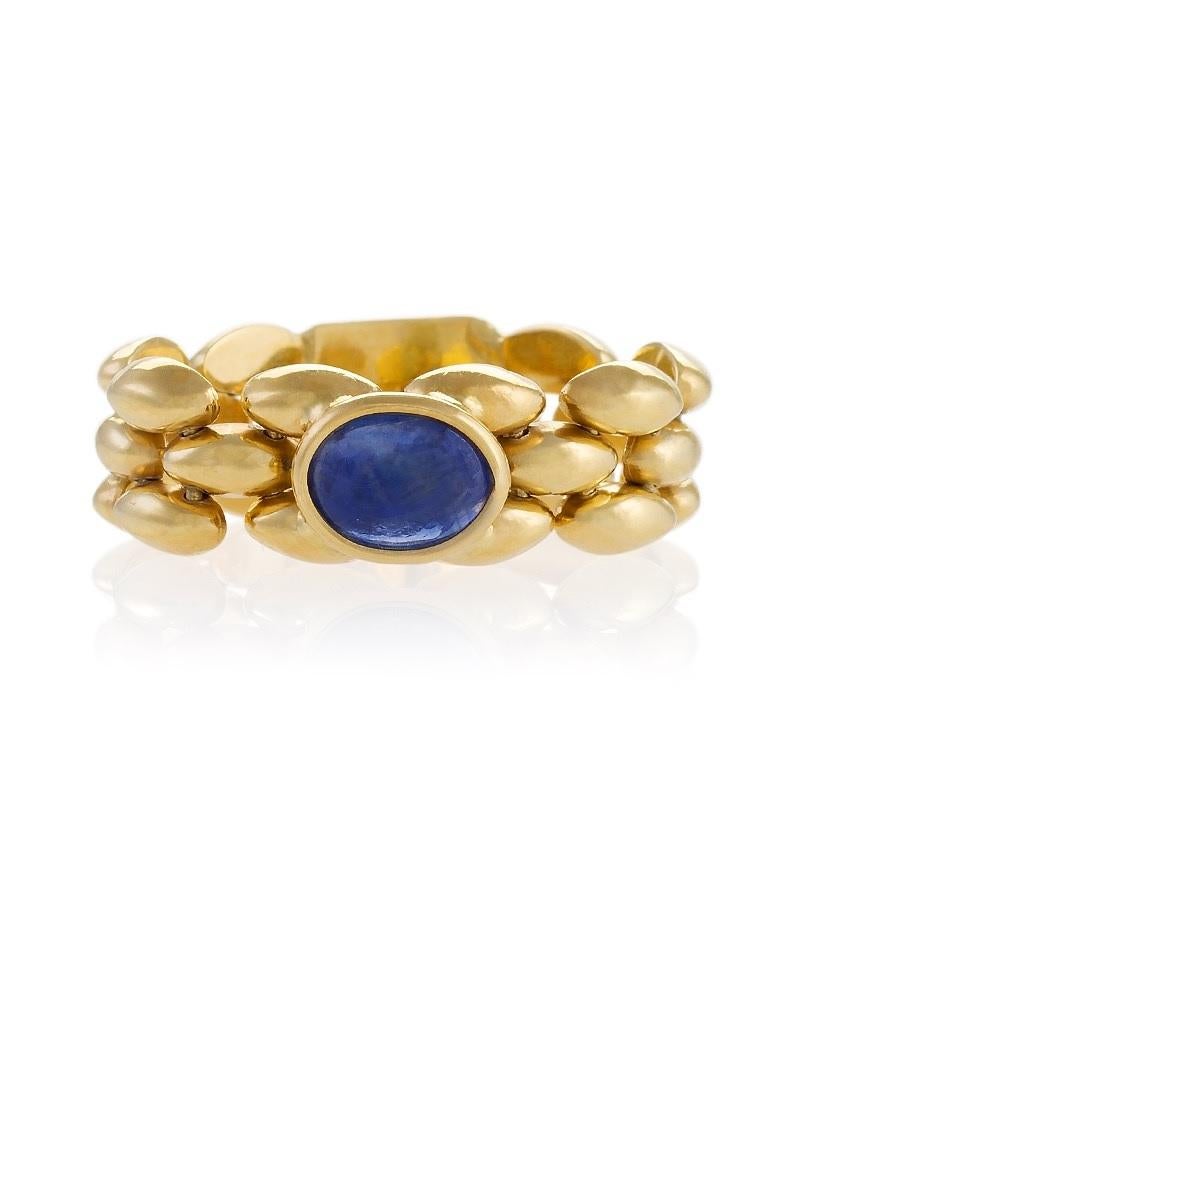 A modern Italian 18 karat gold flexible chain link ring with sapphire. The entirely flexible band of the ring features a fetching woven pattern in high polish. The ring centers on a cabochon sapphire with an approximate weight of .90 carat. Circa